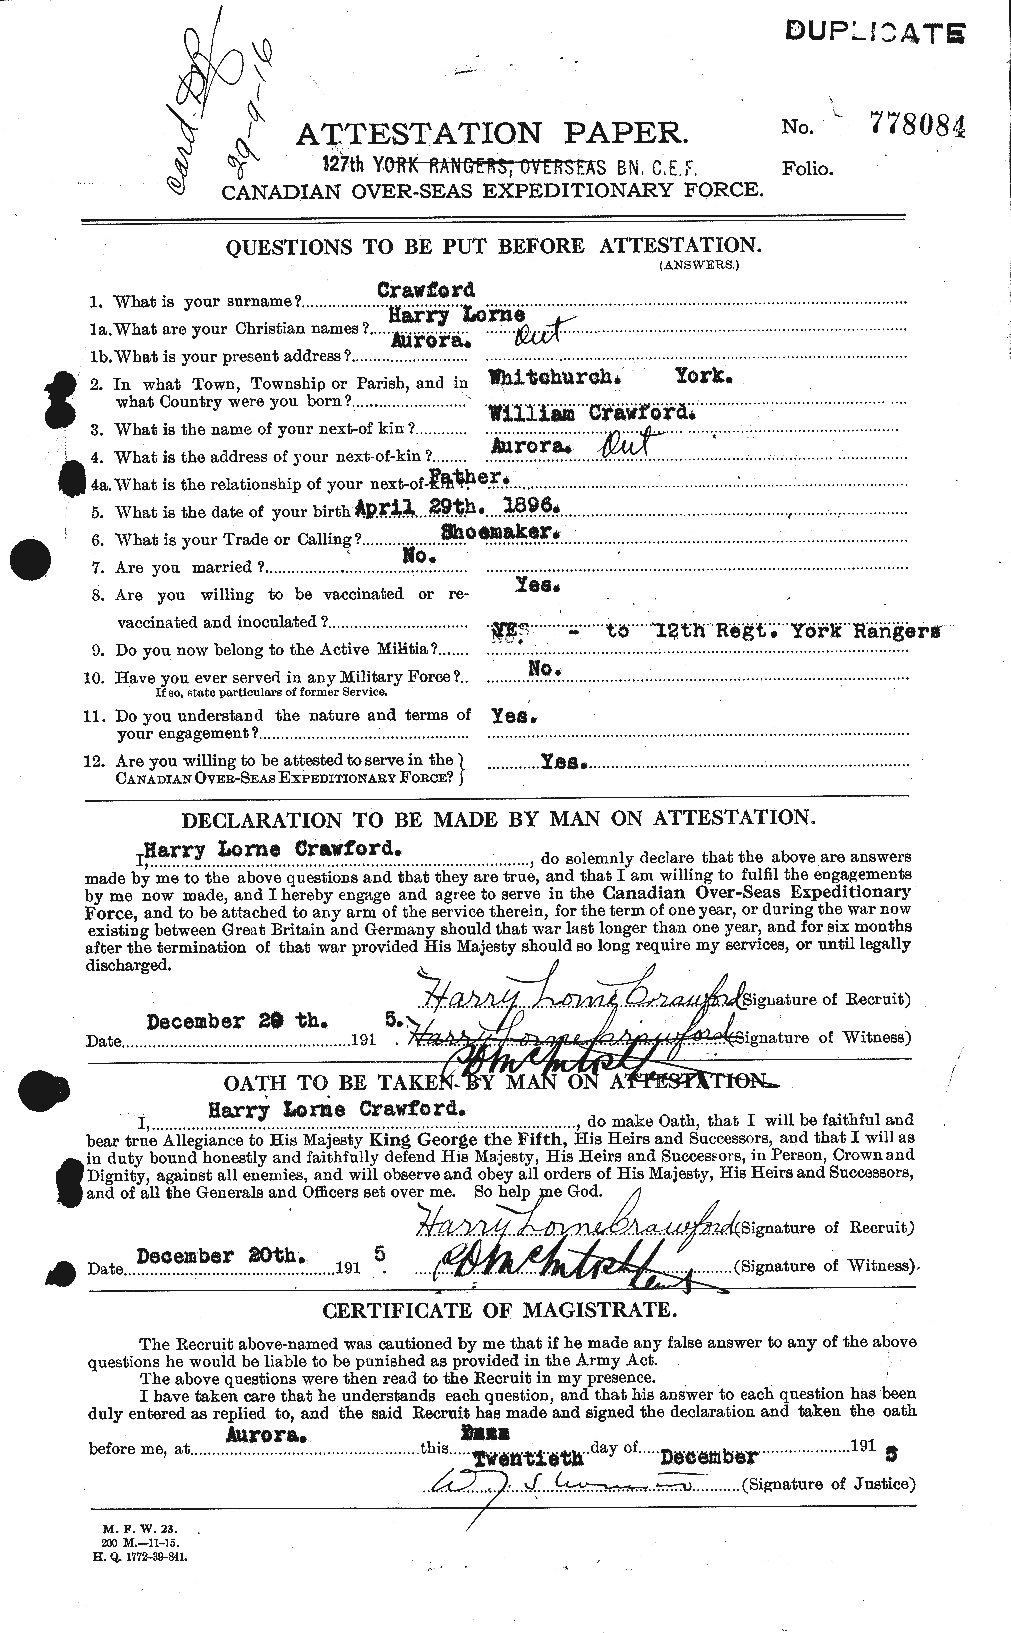 Personnel Records of the First World War - CEF 060577a